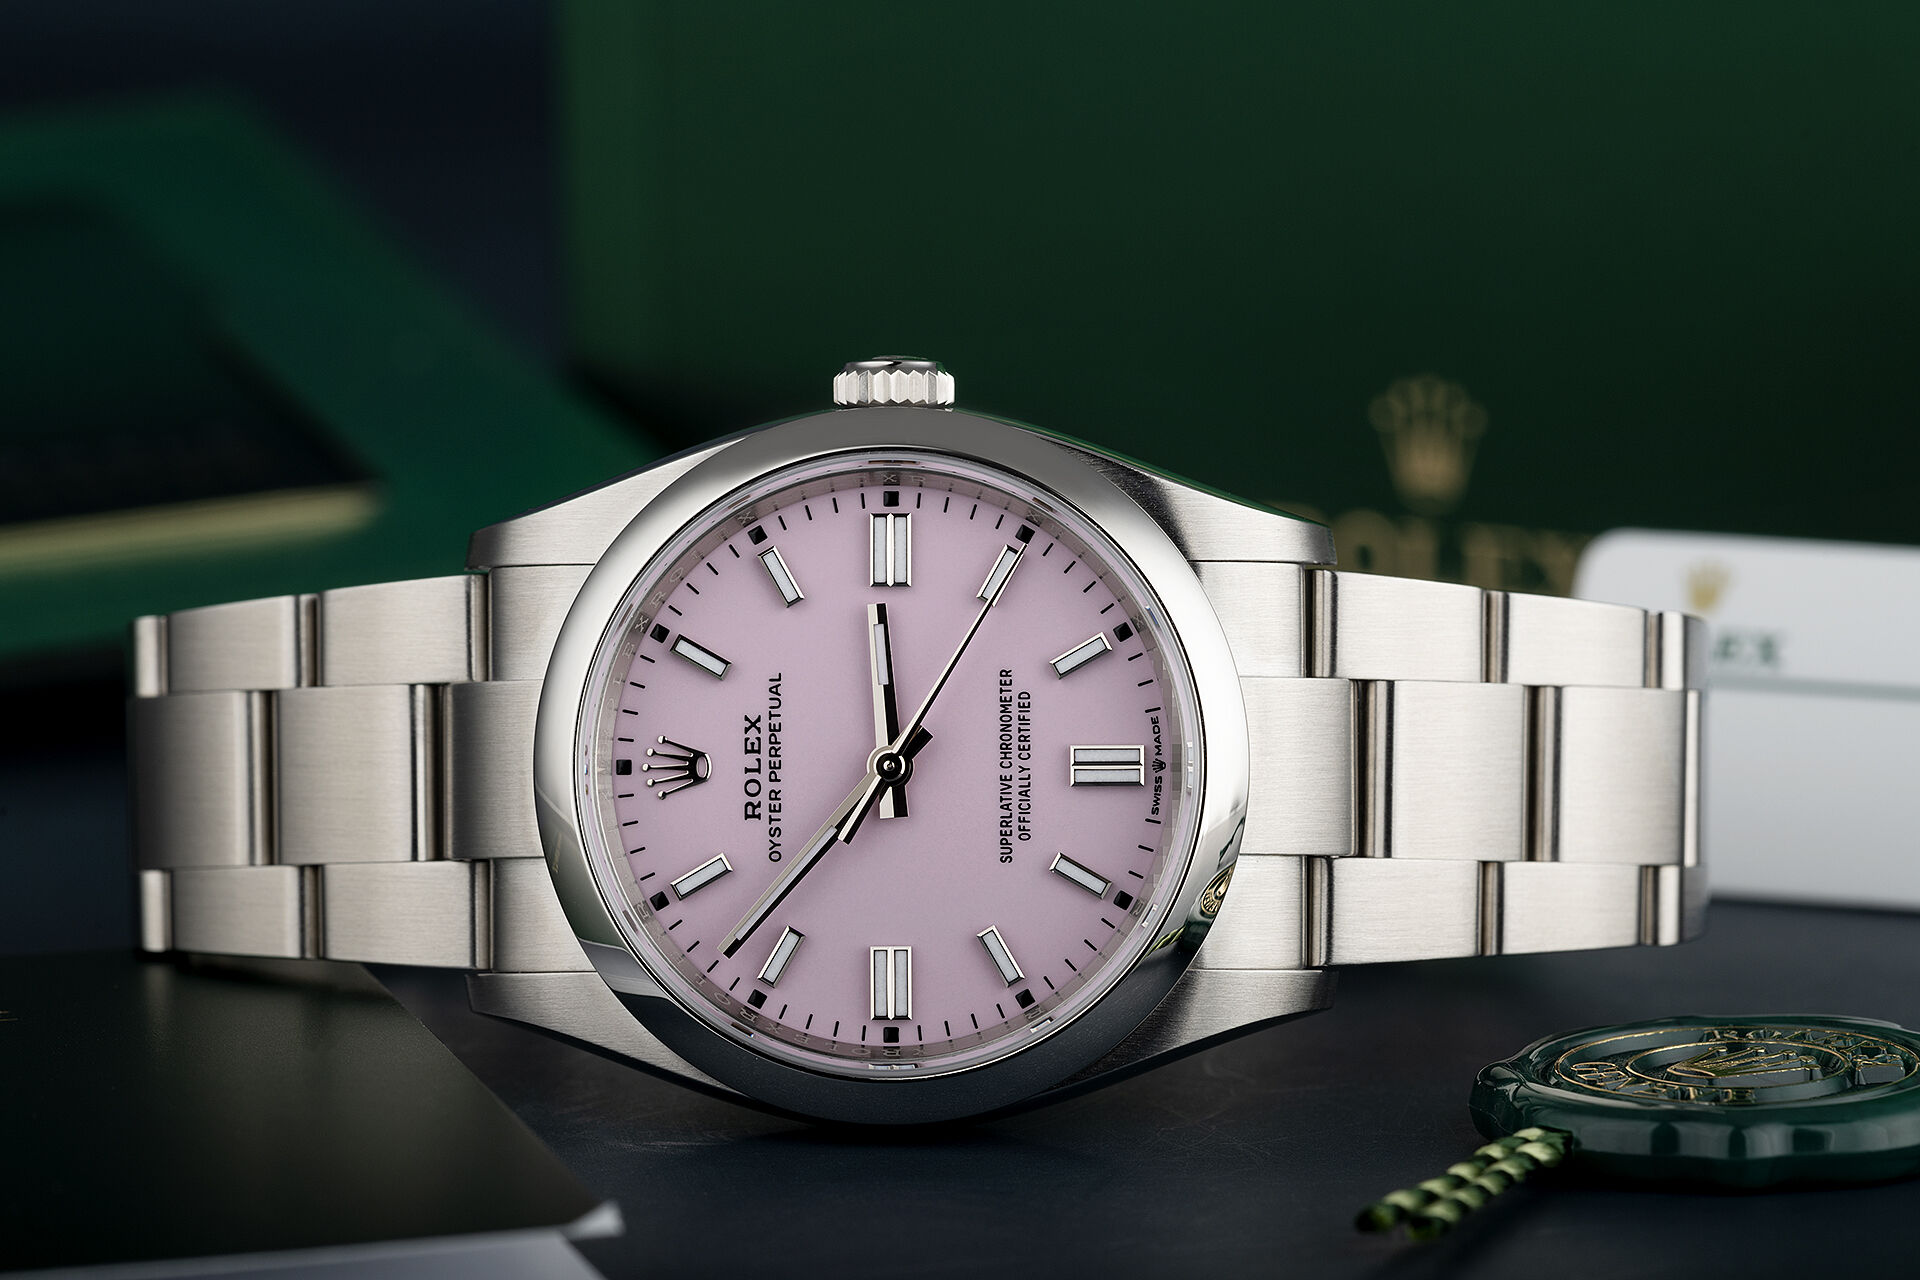 ref 126000 | 'Brand New' | Rolex Oyster Perpetual